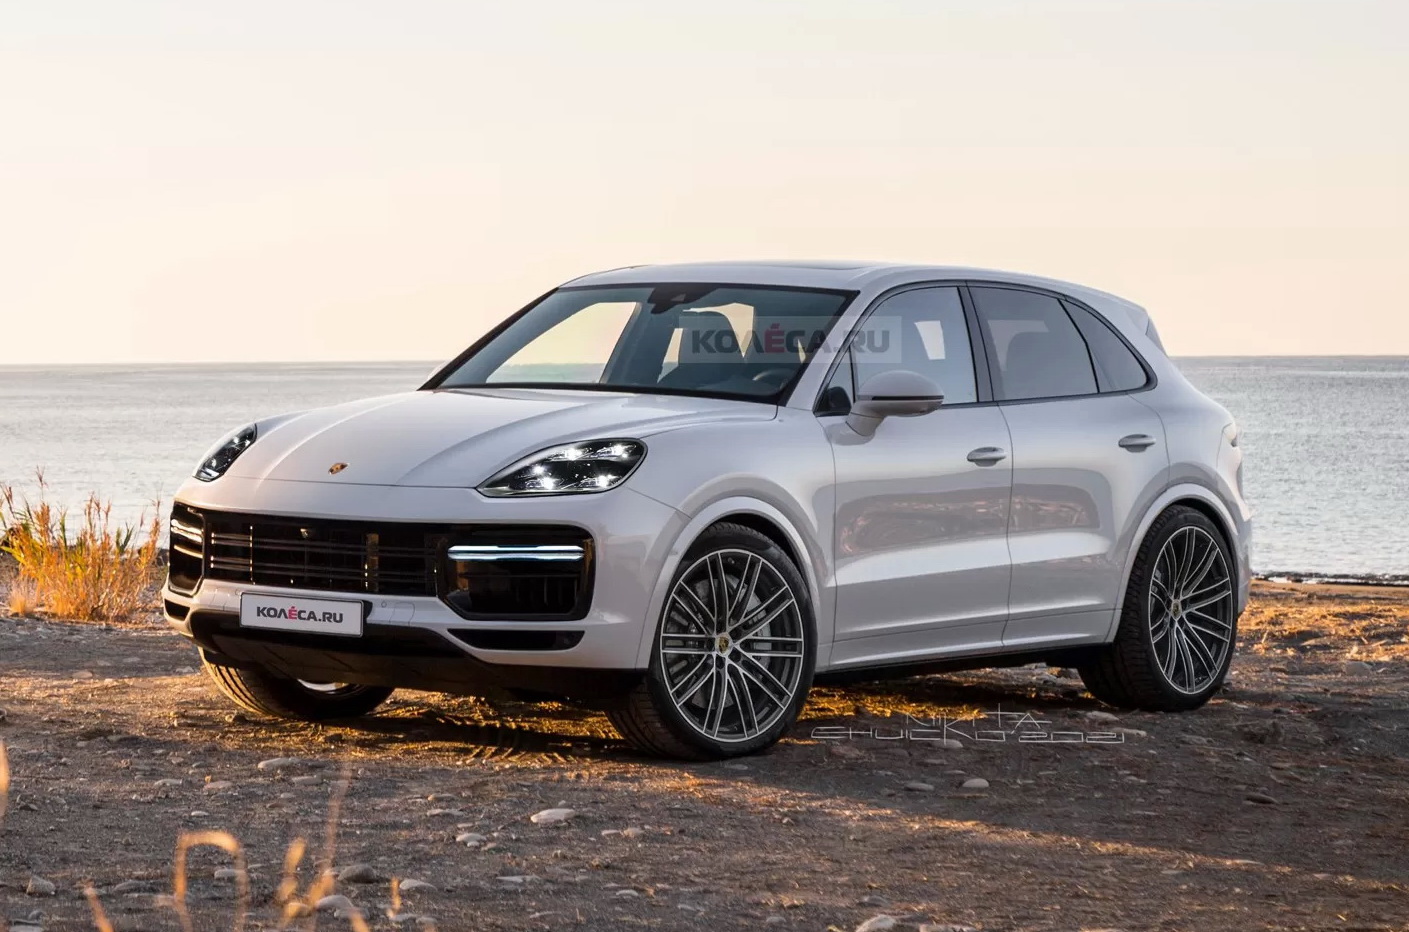 2022 Porsche Cayenne Facelift Rendered According to Recent Spy Images -  autoevolution